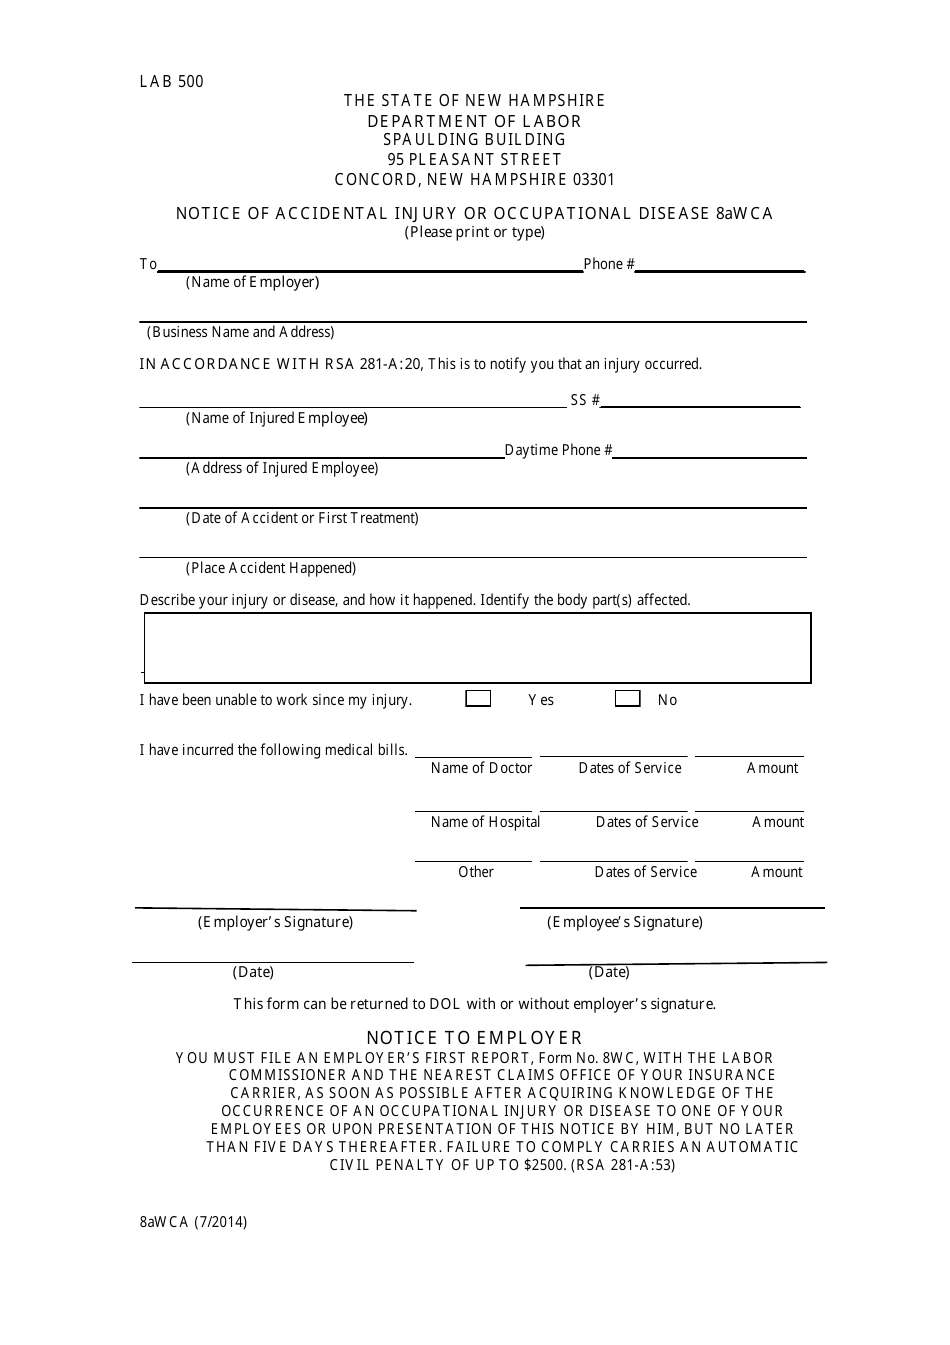 Form 8AWCA Notice of Accidental Injury or Occupational Disease - New Hampshire, Page 1